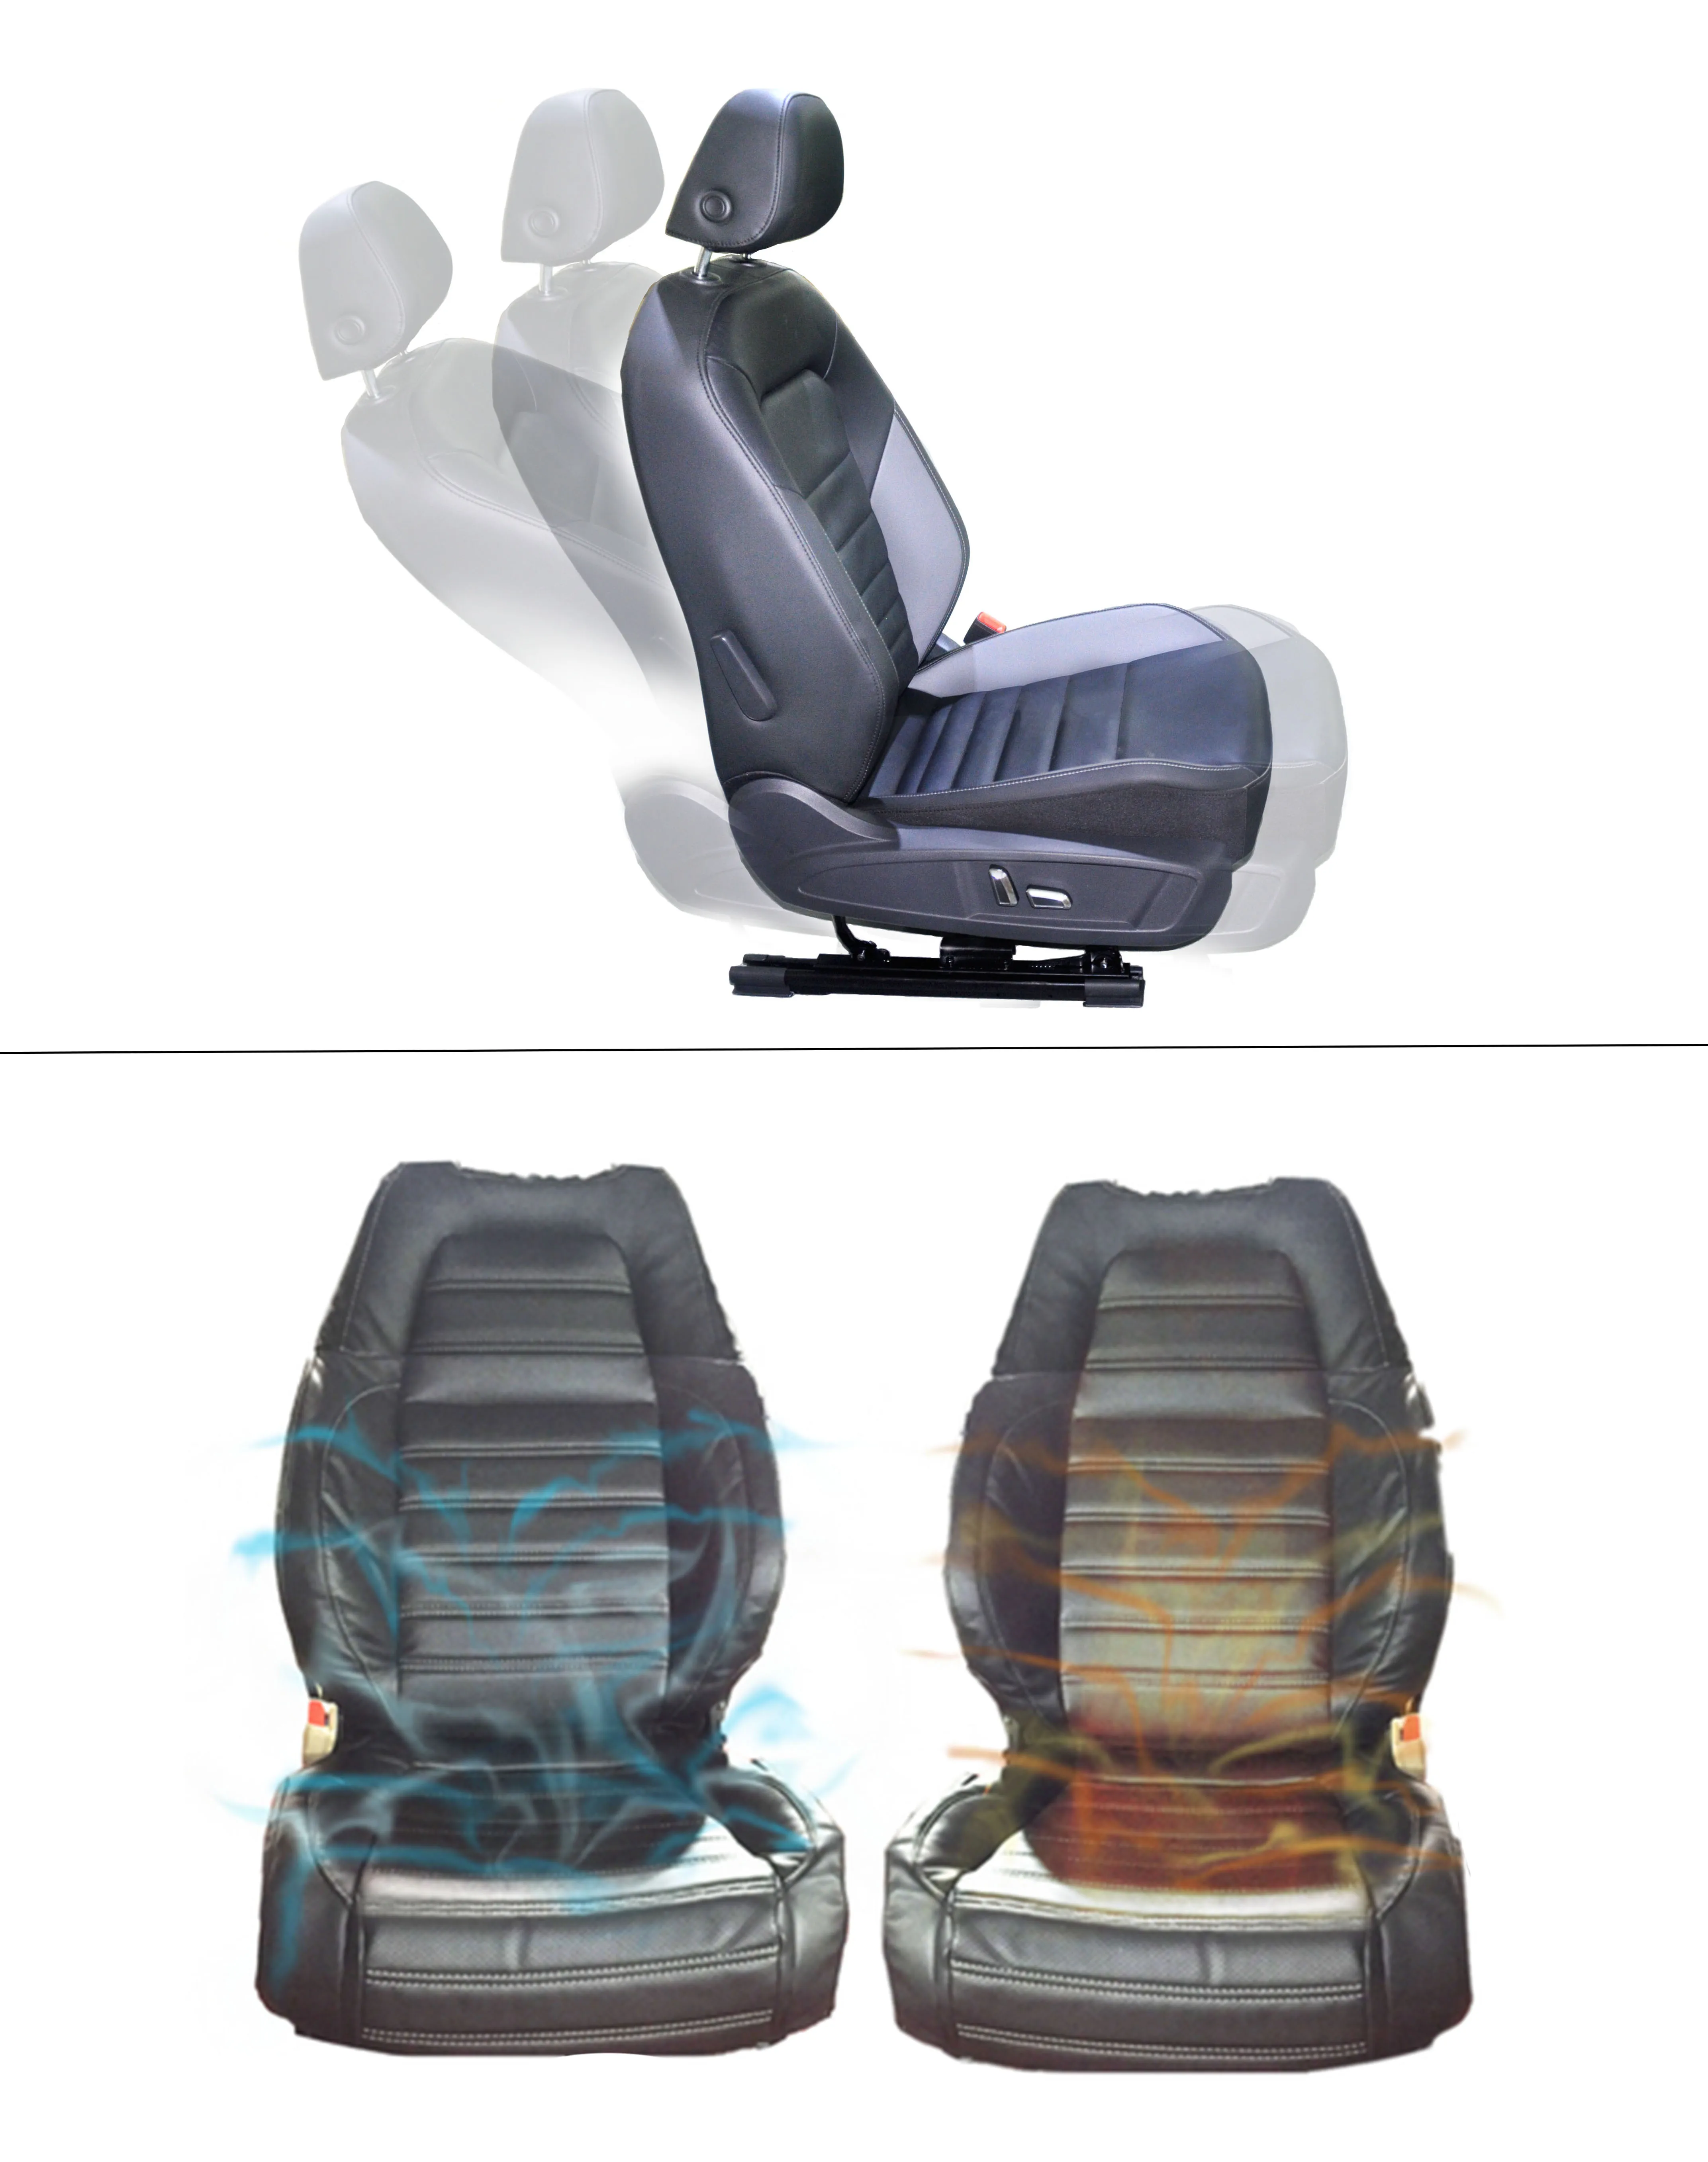 New Directinstalled Electric Seats,Main Driver And Copilot Seats For